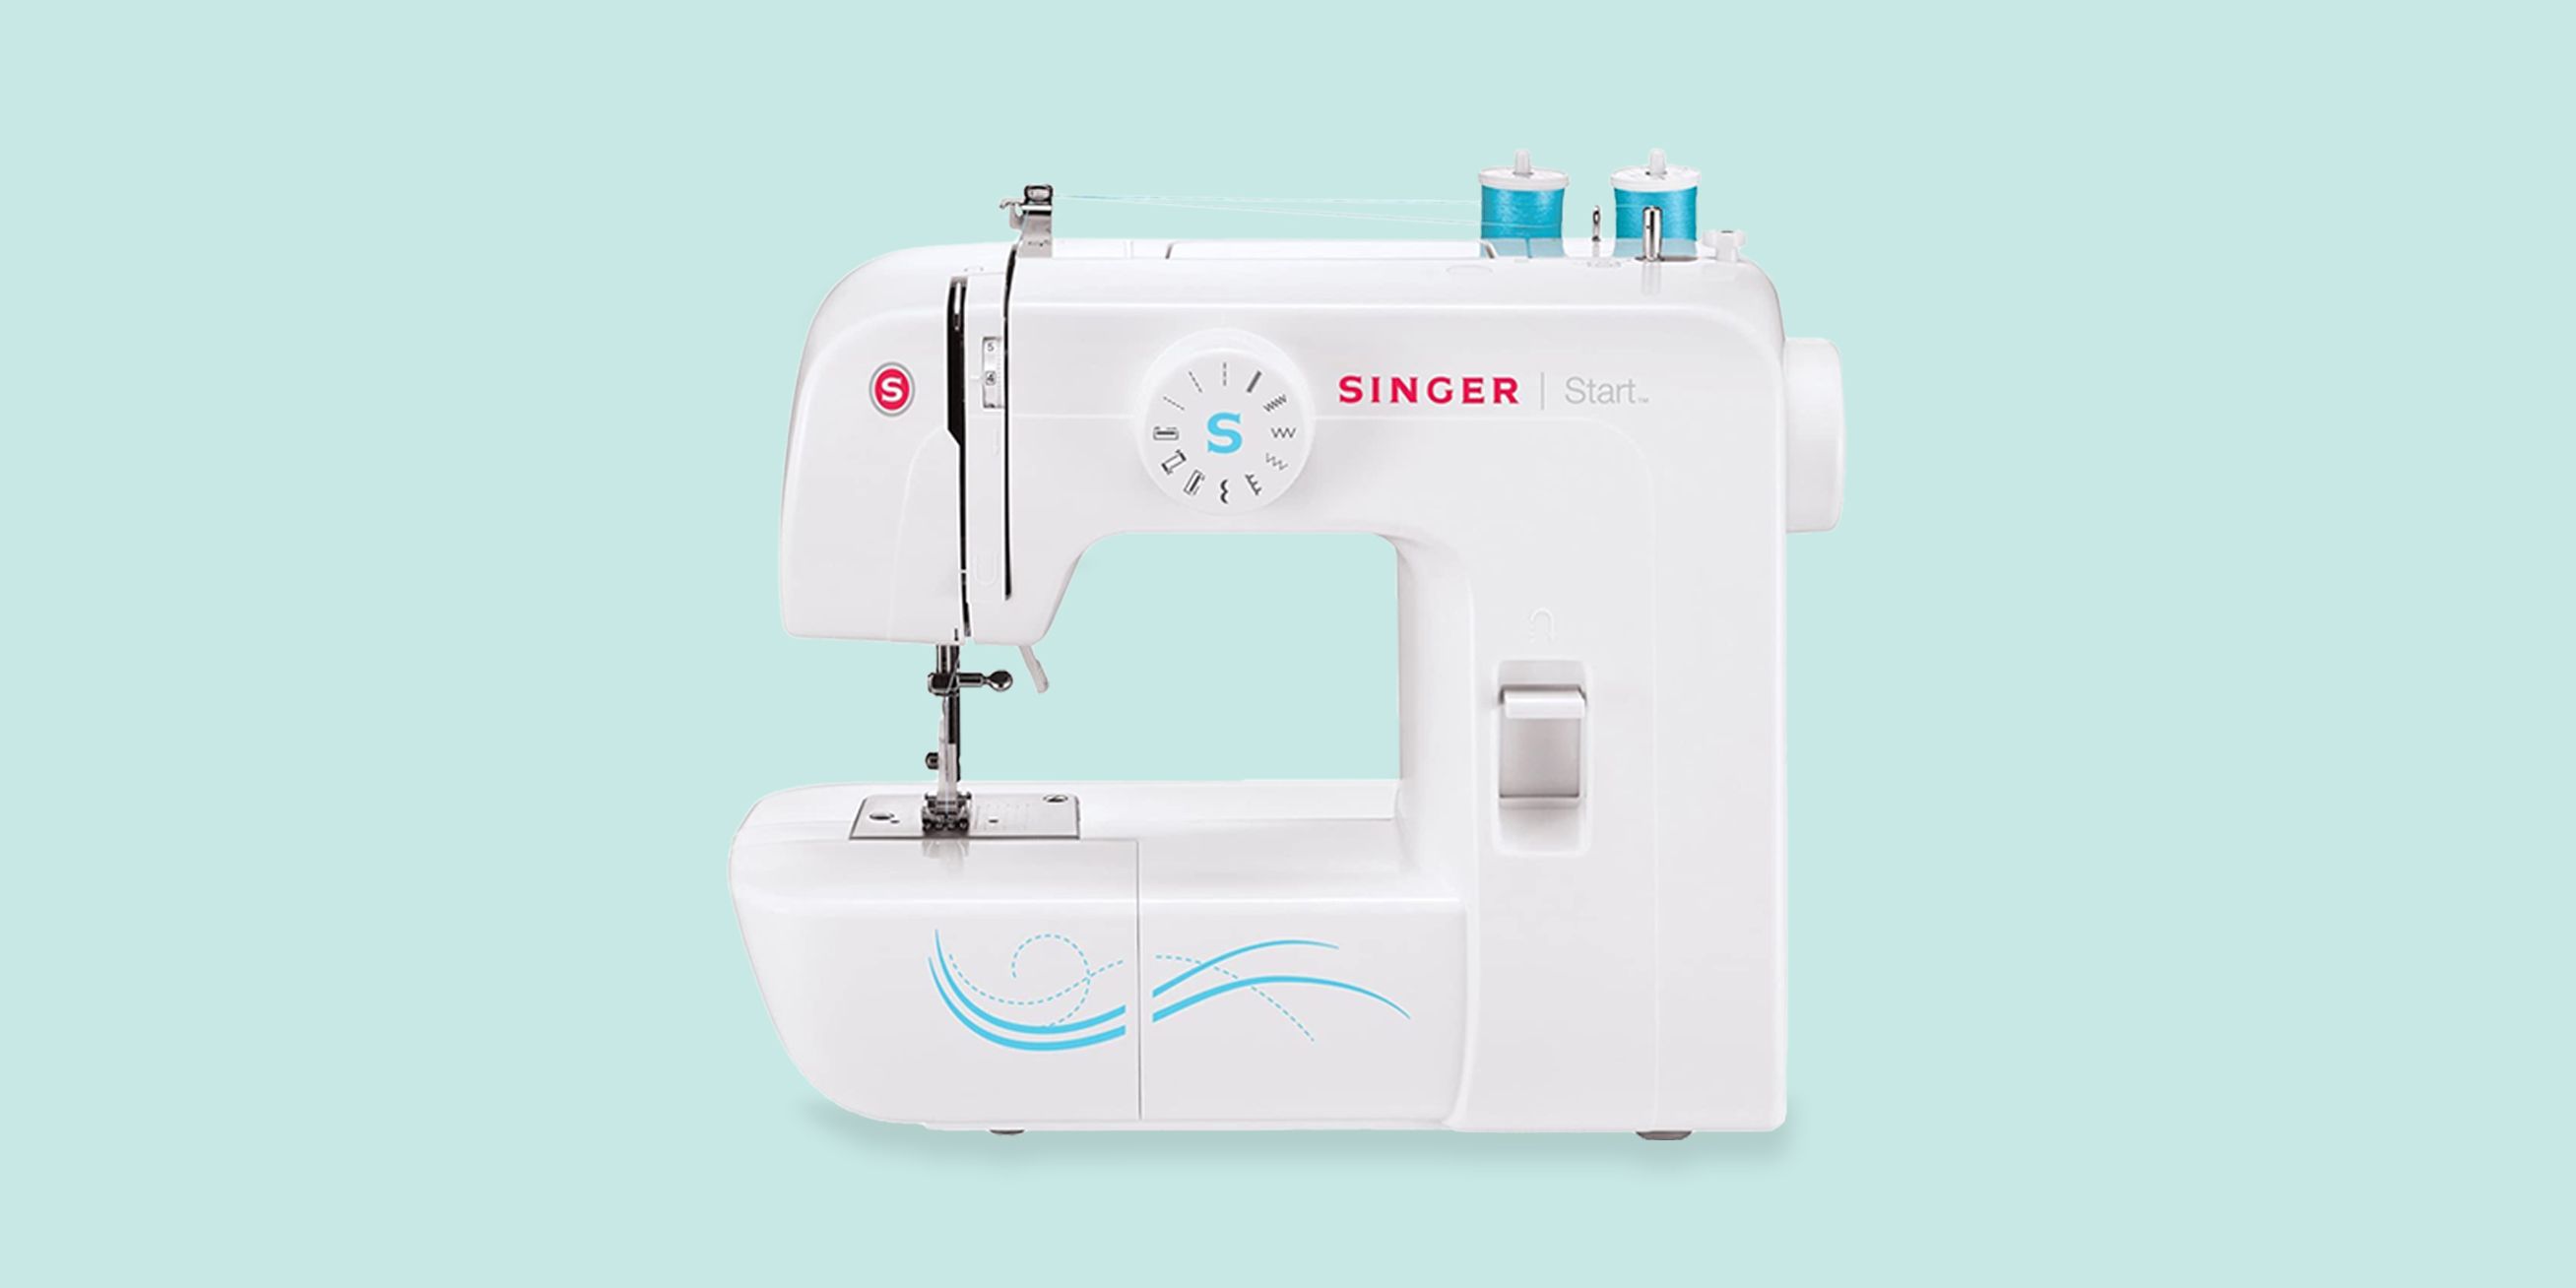 Electric Sewing Machine,Mini Portable Handheld Household Multifunction 12 Stitches Double Thread and Speed Free-Arm Crafting Mending Machine LED Light Sewing Classes Beginner Sewing Machine kit 